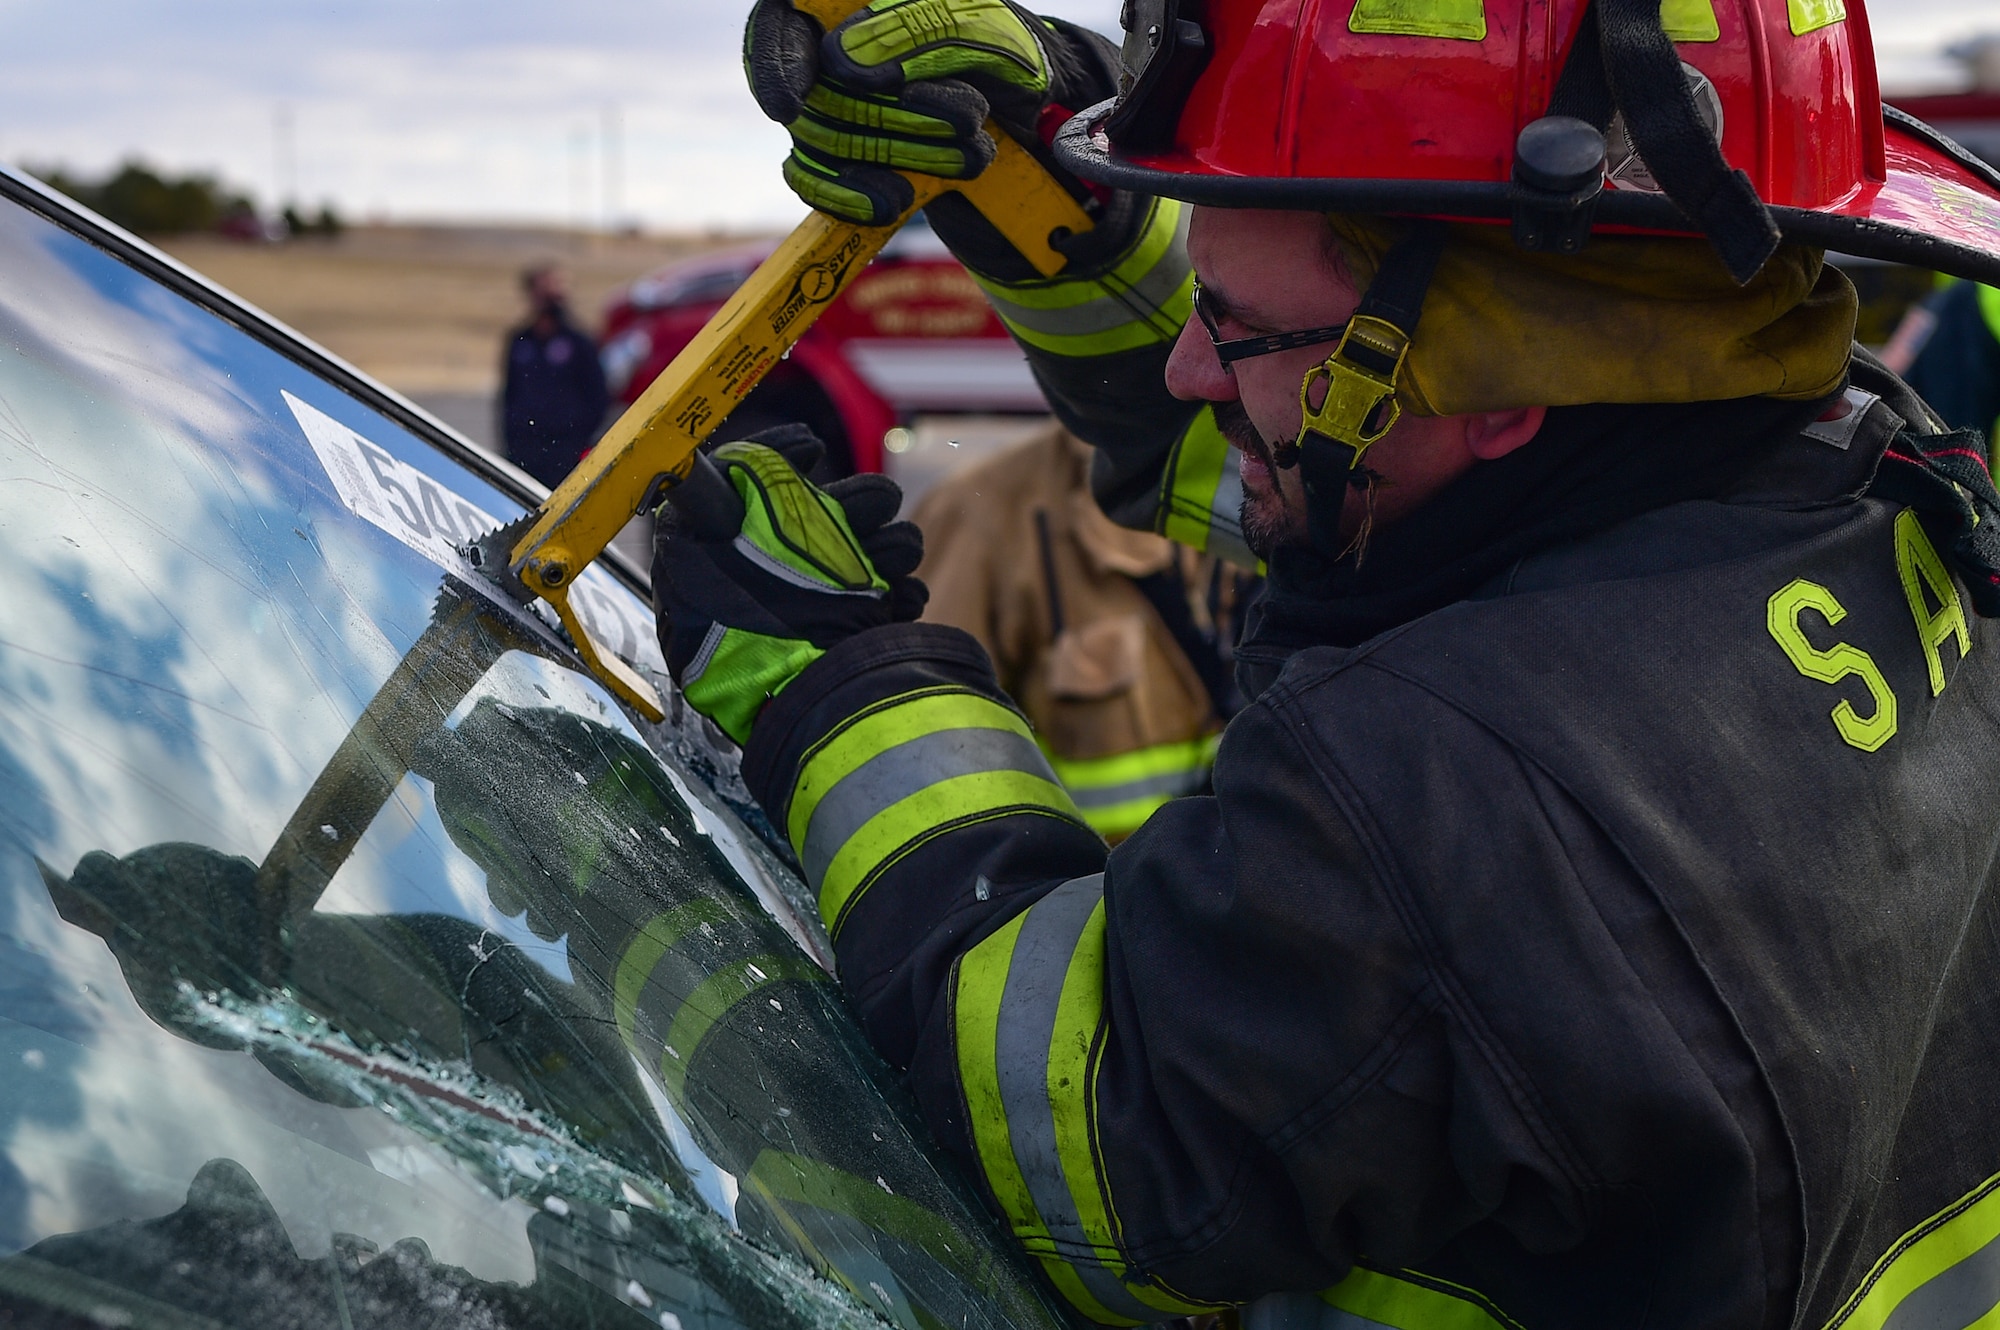 Fire Lt. Chris Gay, the training cordinator for the Sable Altura Fire Rescue, saws into the windshield of a car during an auto extraction exercise on Buckley Air Force Base, Colo., Feb. 24, 2021.